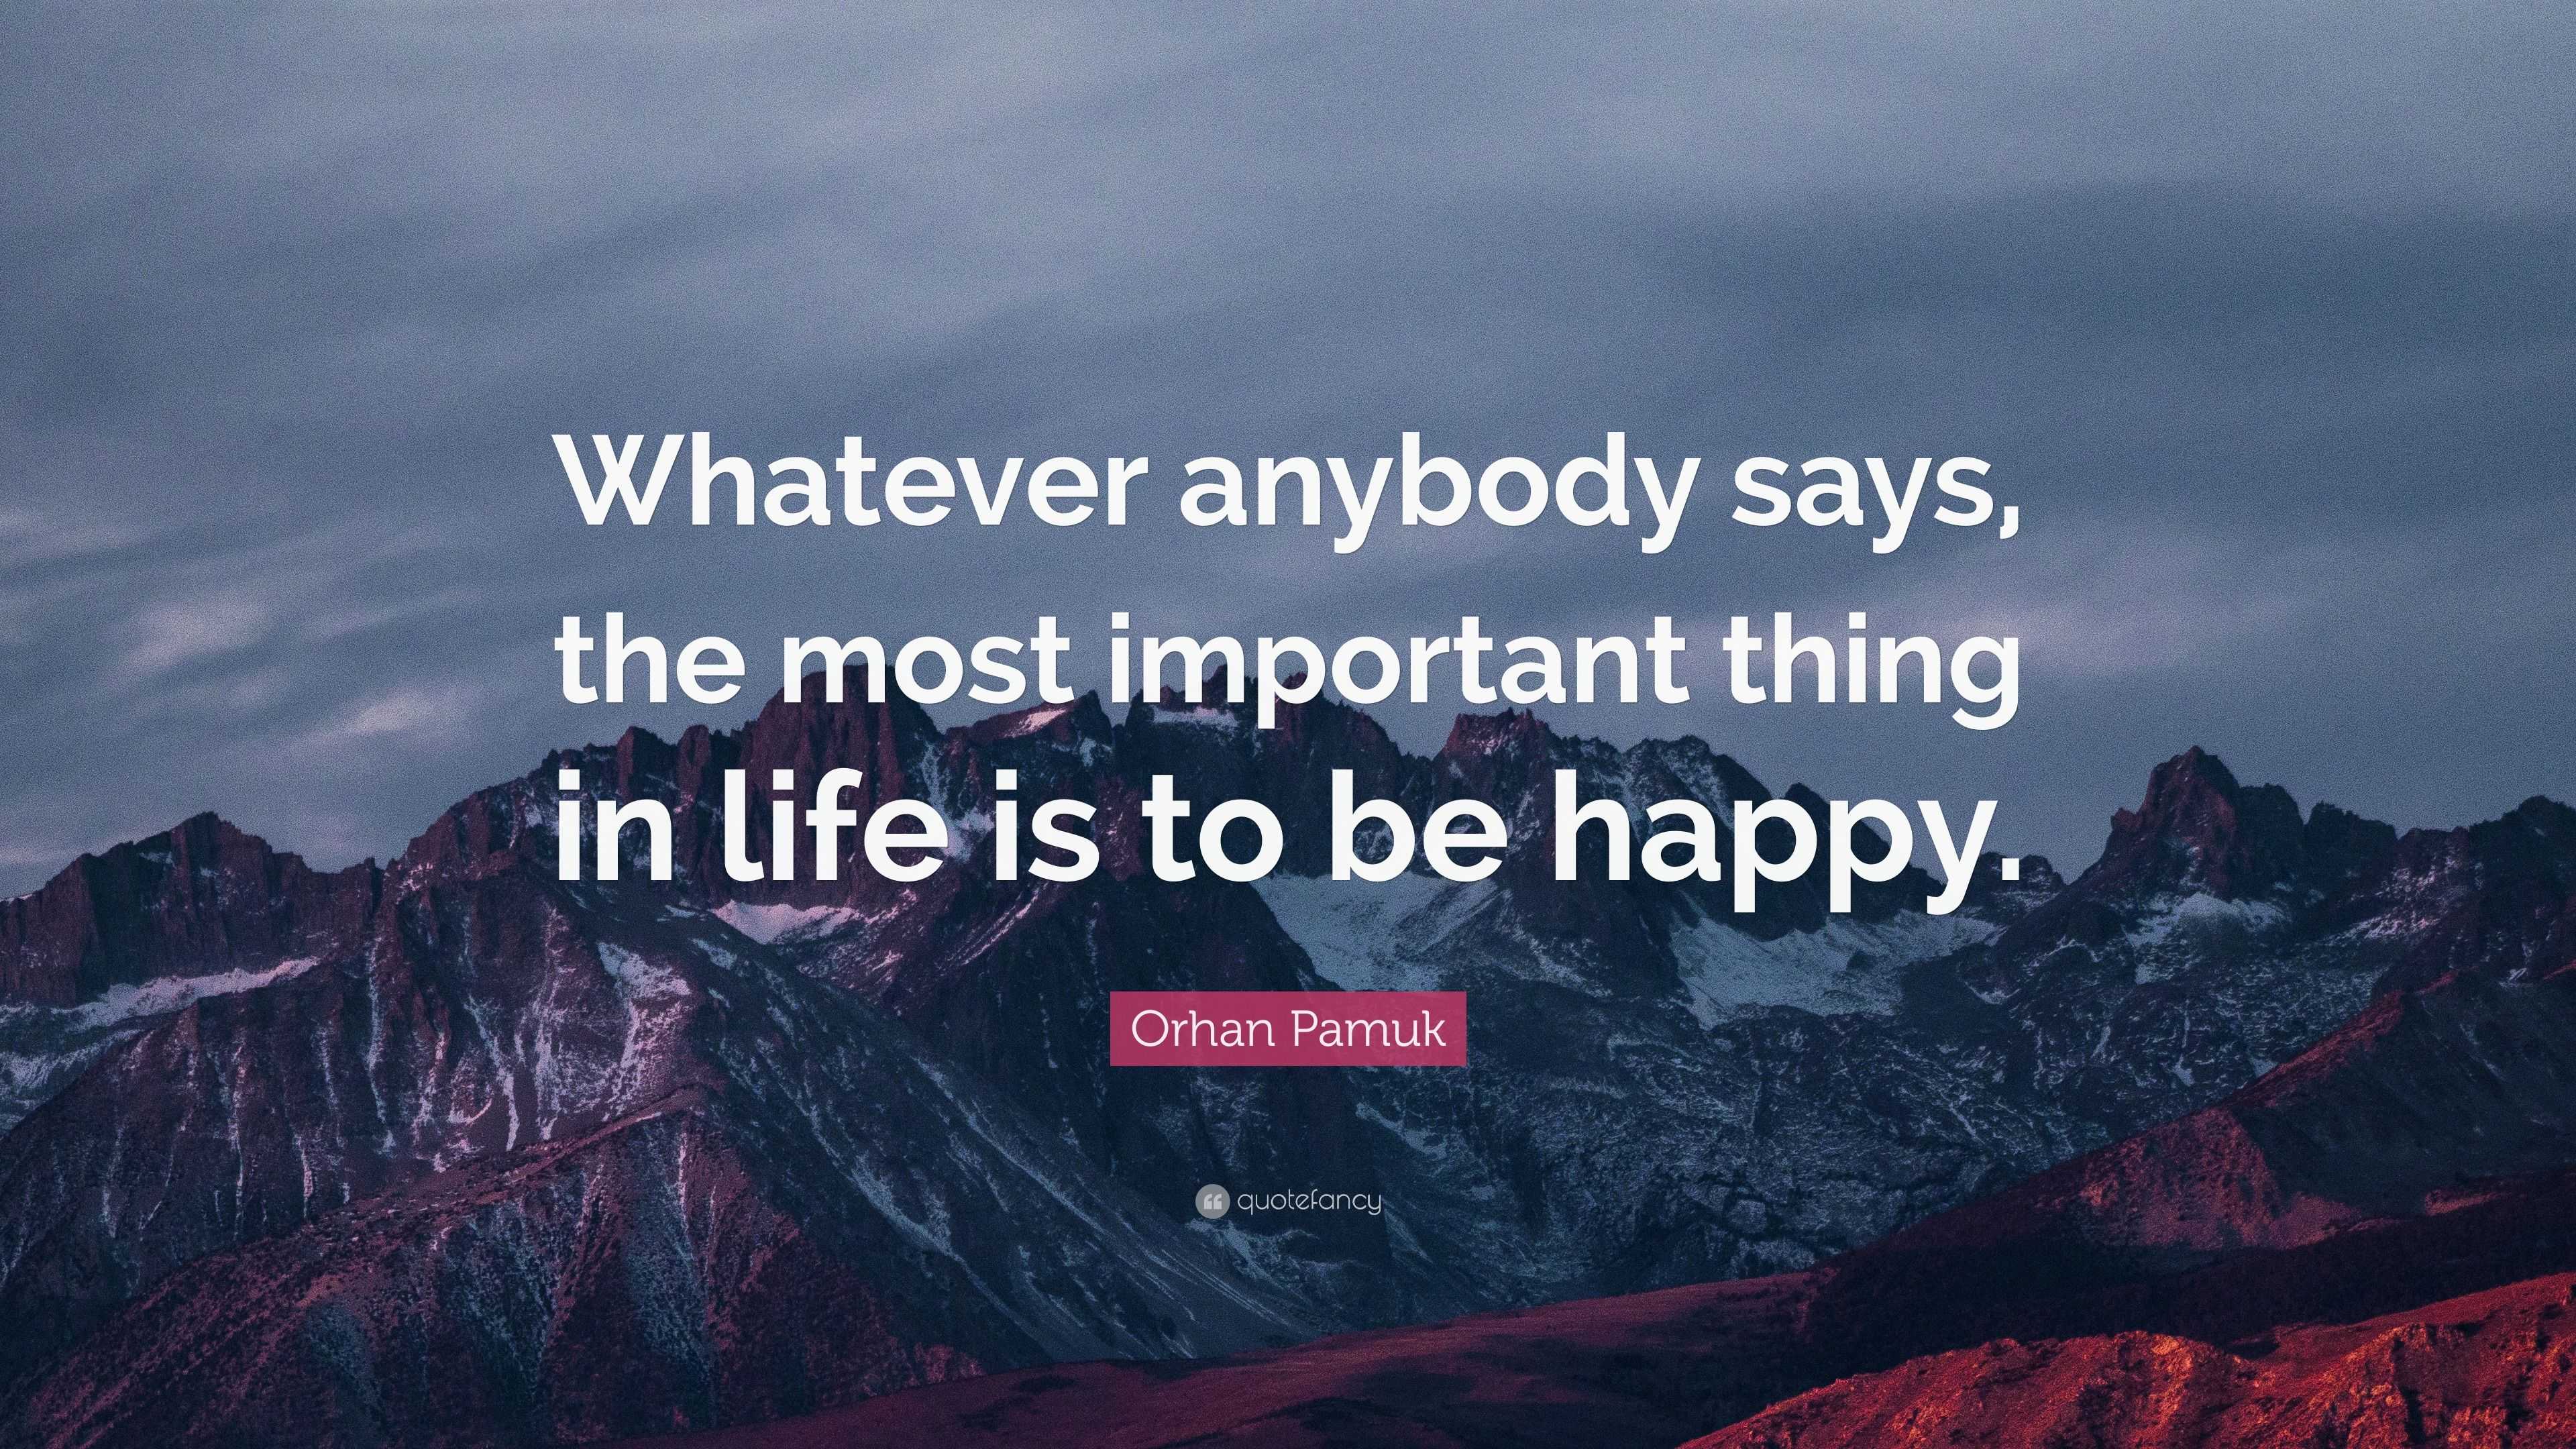 Orhan Pamuk Quote: “Whatever anybody says, the most important thing in ...